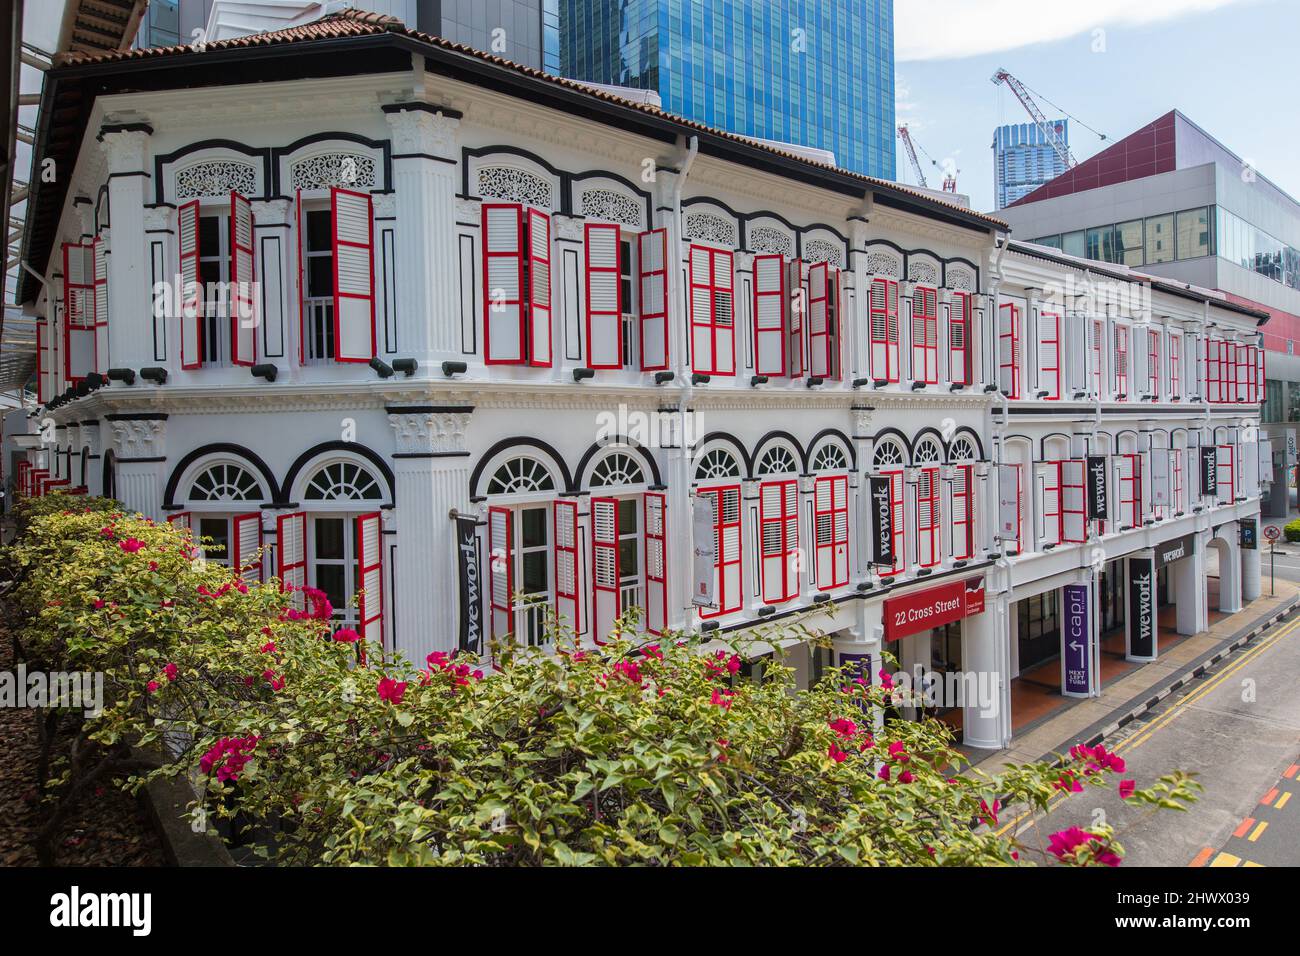 Old shophouses refurnished into a commercial structure for business. Chinatown, Singapore. Stock Photo